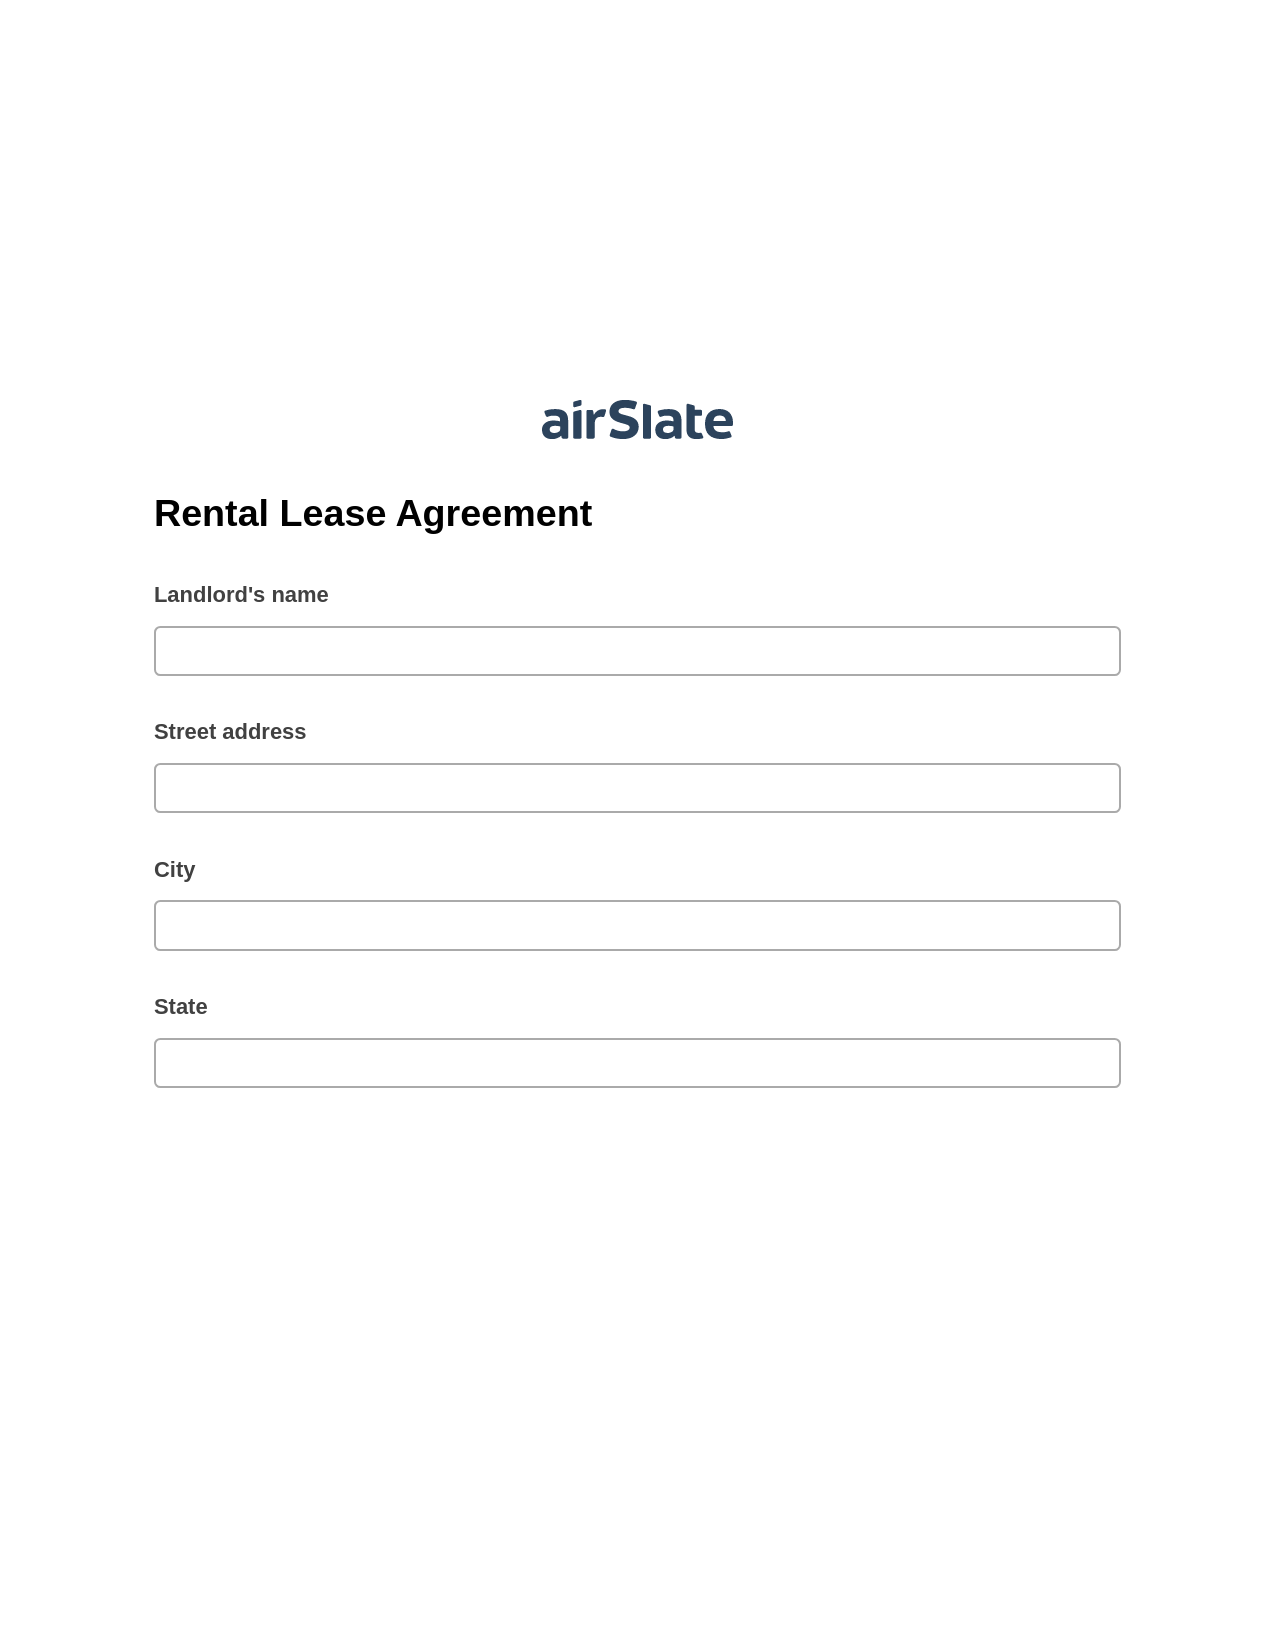 Rental Lease Agreement Pre-fill Document Bot, Assign Slate Name Bot, Export to Excel 365 Bot